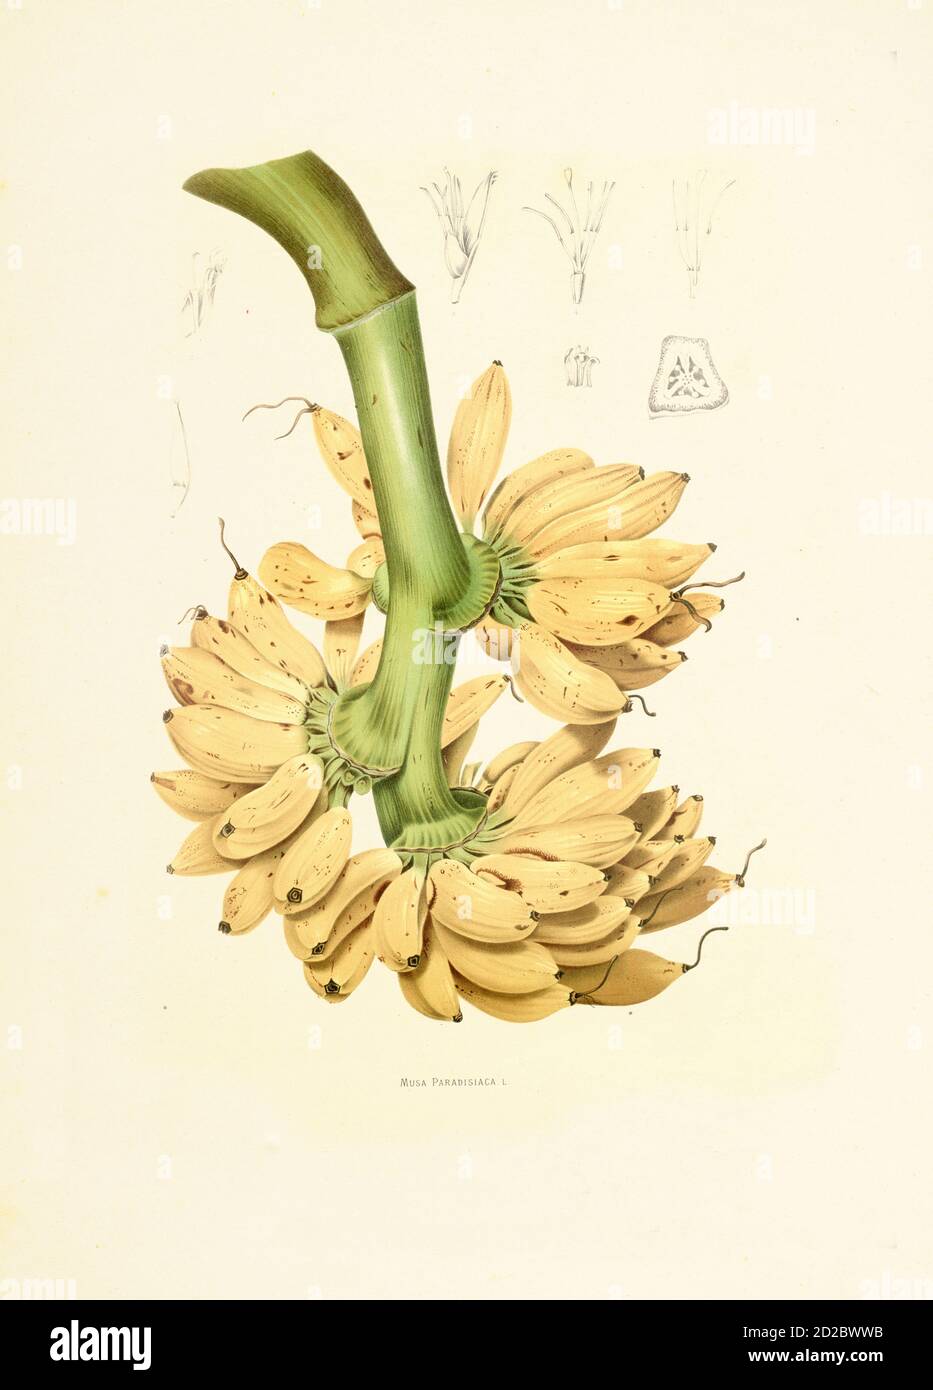 Antique engraving of musa paradisiaca (also known as French plantain or simply plantain). Illustration by Berthe Hoola van Nooten from the book Fleurs Stock Photo